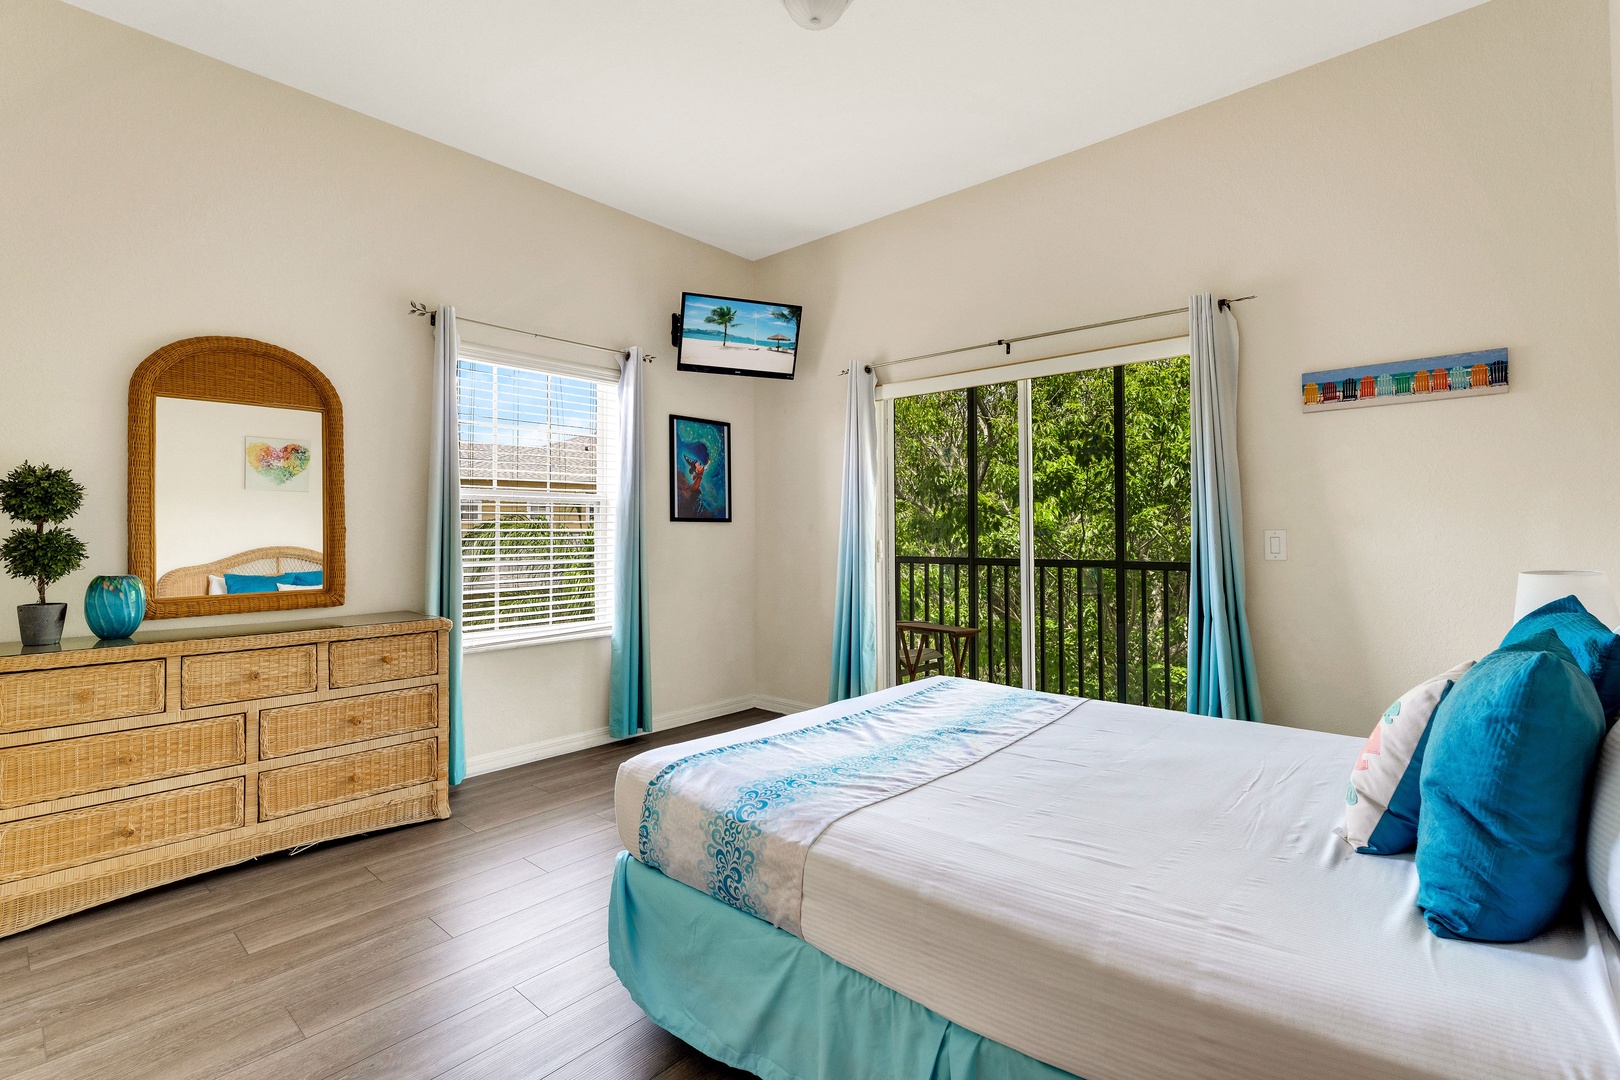 The tranquil queen suite offers an attached bath, TV, & balcony access